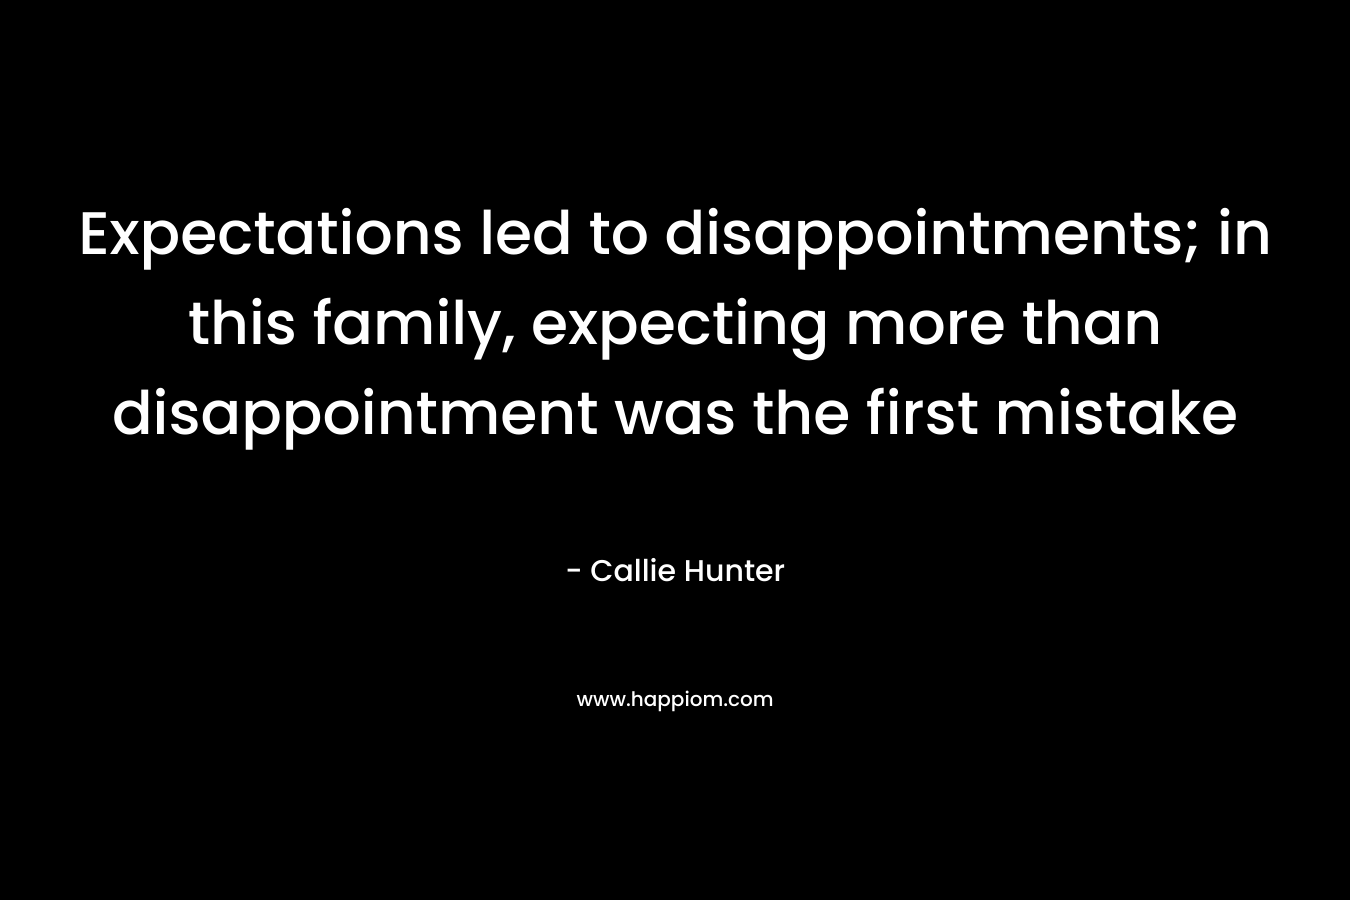 Expectations led to disappointments; in this family, expecting more than disappointment was the first mistake